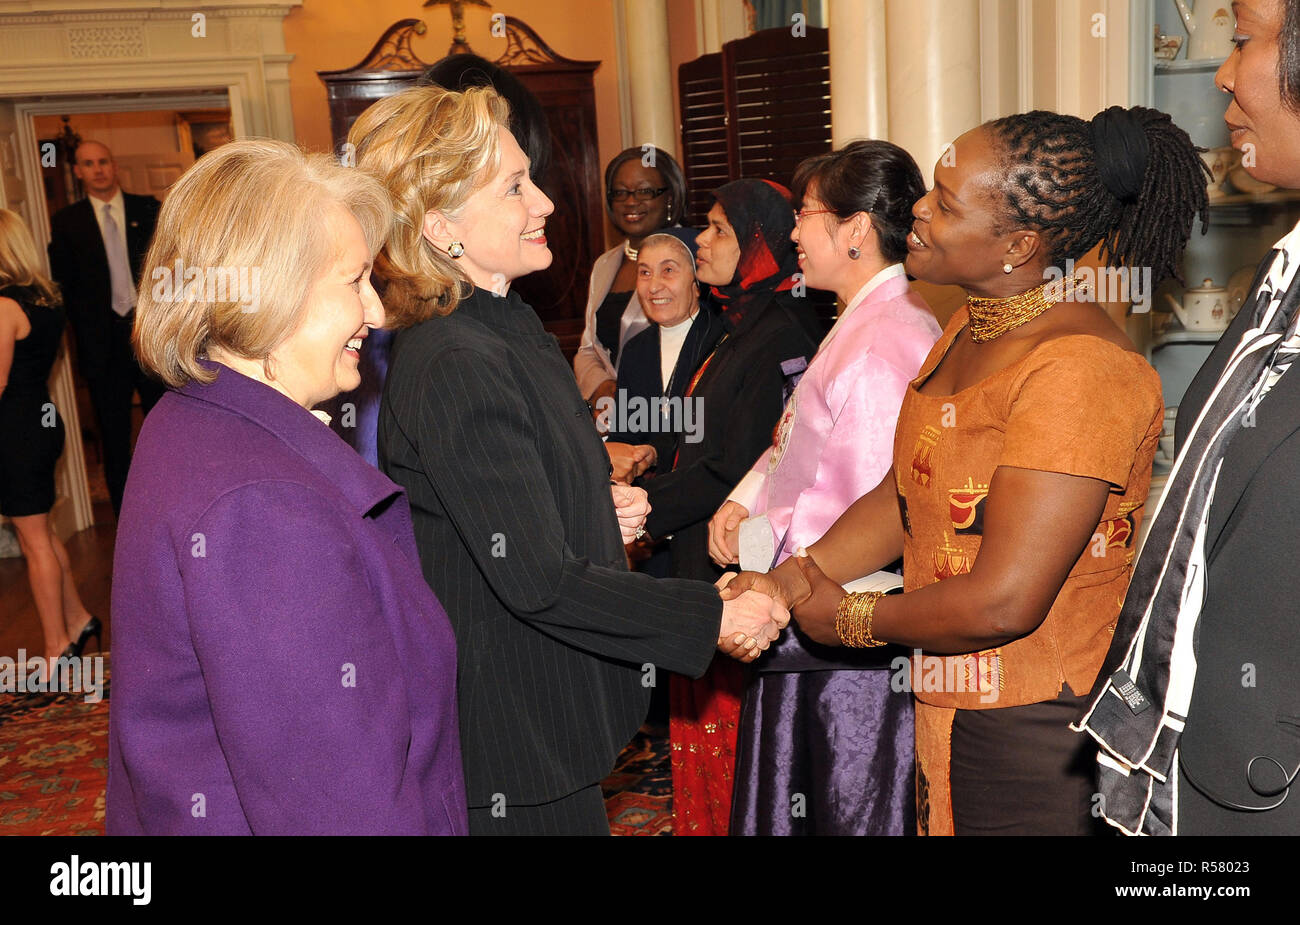 2010 - U.S. Secretary of State Hillary Rodham Clinton shakes hands with Honoree Ann Njogue of Kenya at the 2010 International Women of Courage at the U.S. Department of State, March 10, 2010. Stock Photo